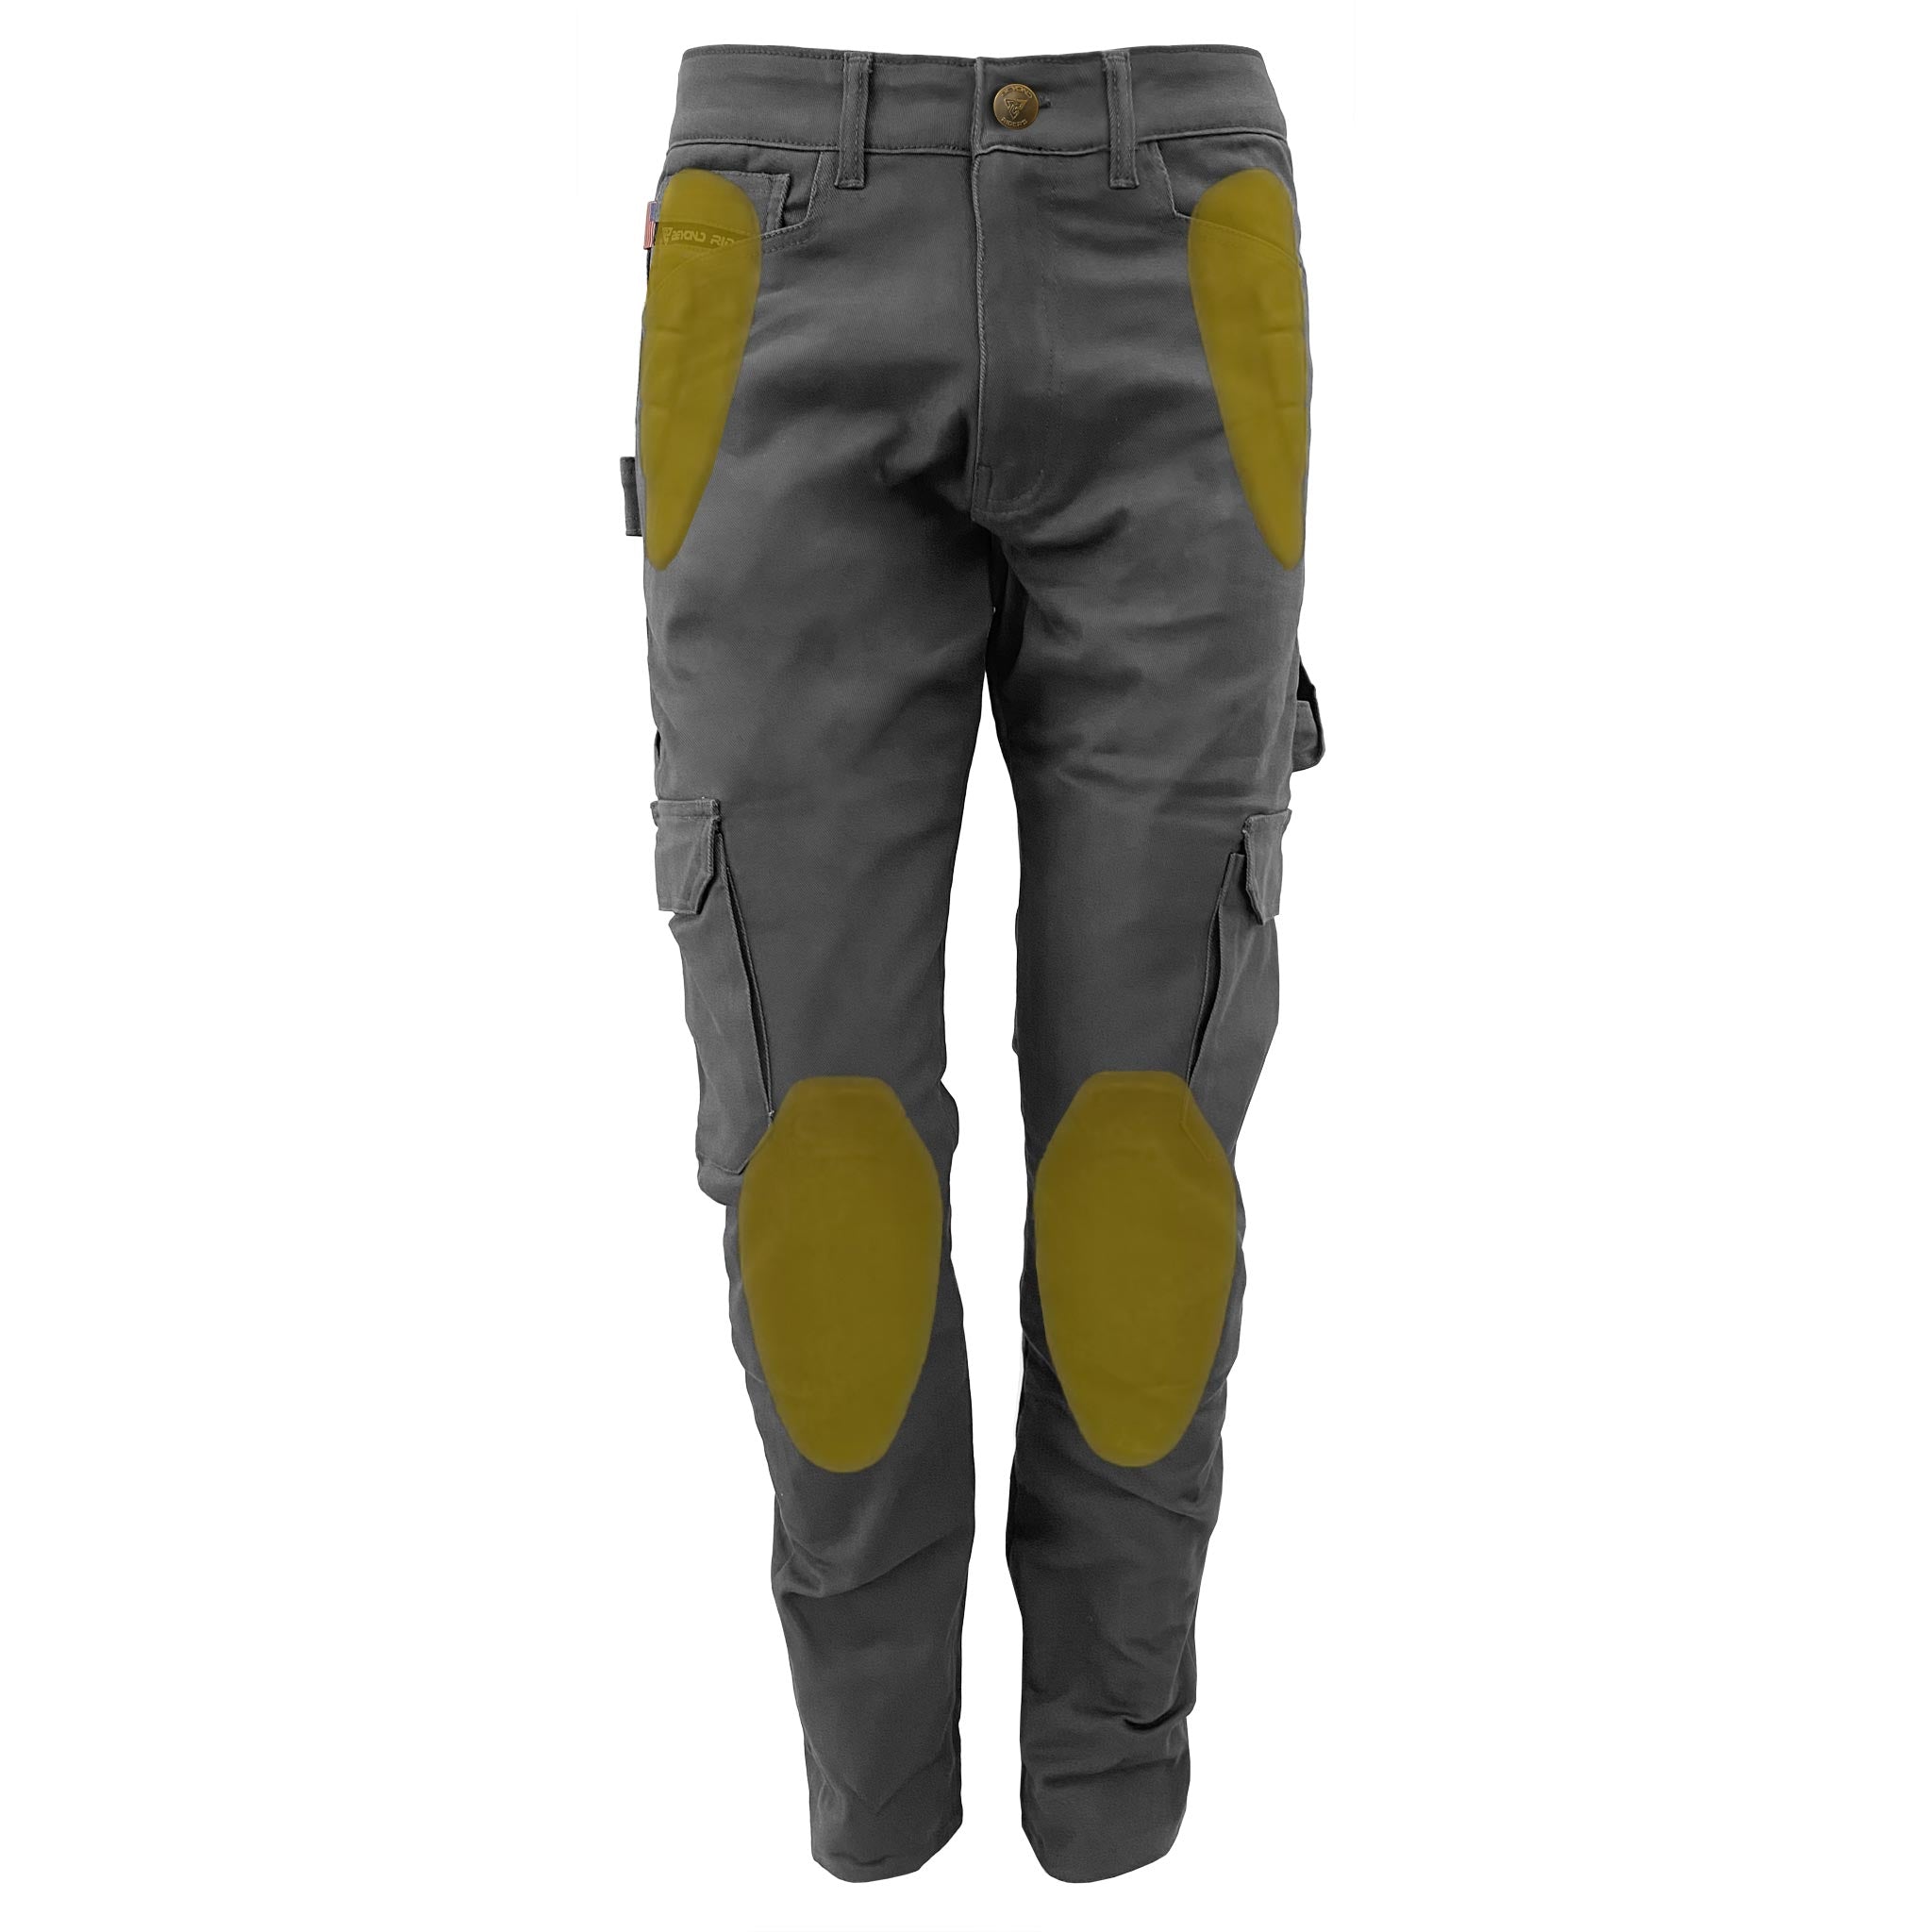 men's-cargo-pants-gray-color-with-pads-front